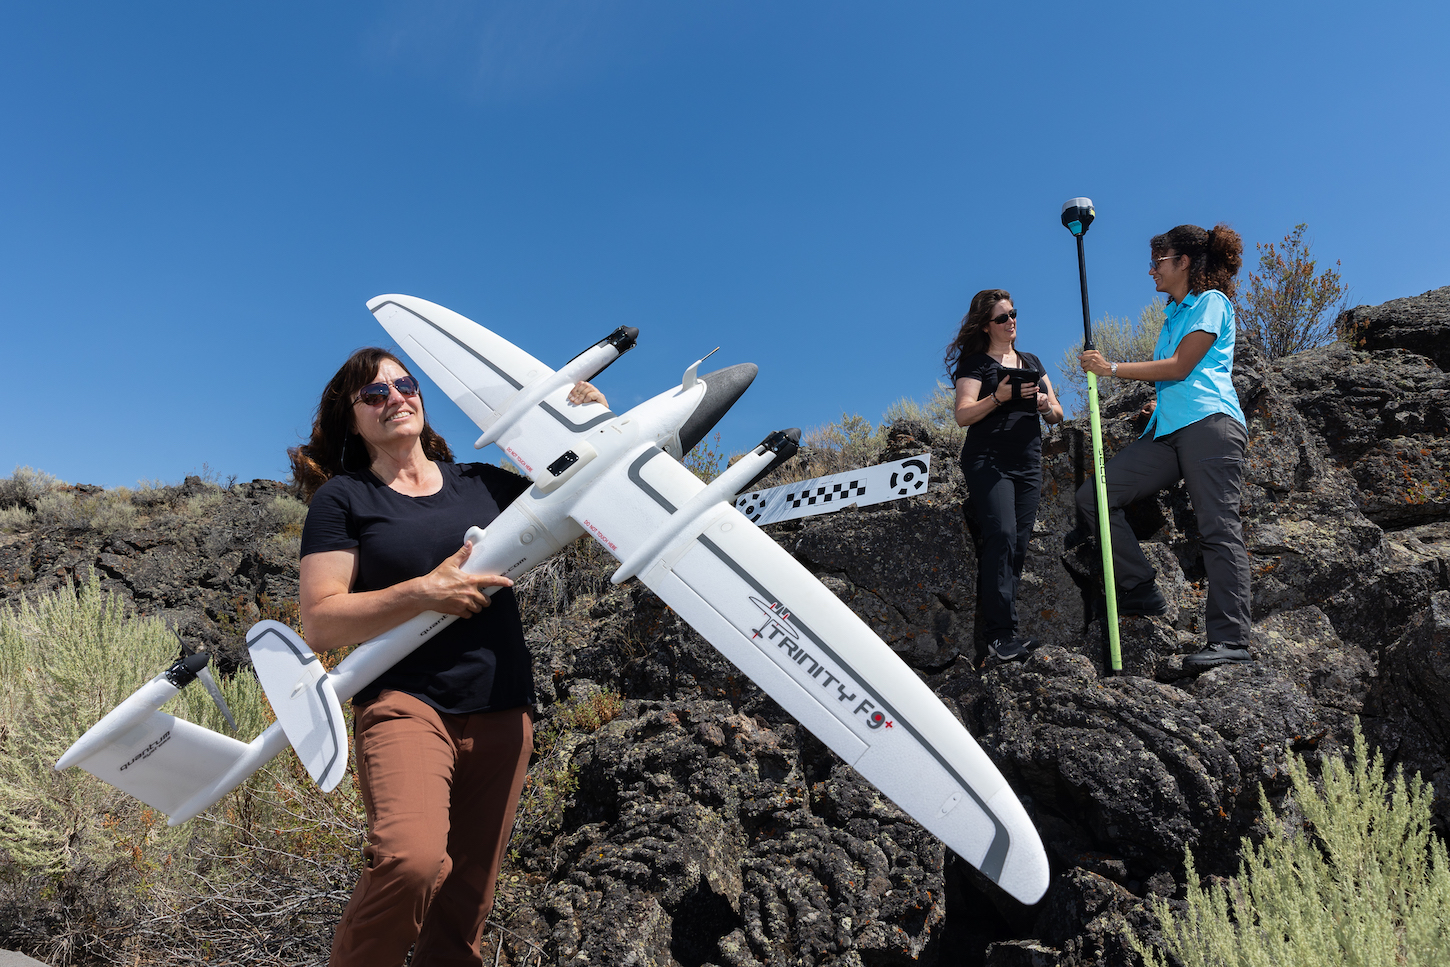 three women stand on a rocky area, one with a small plane.